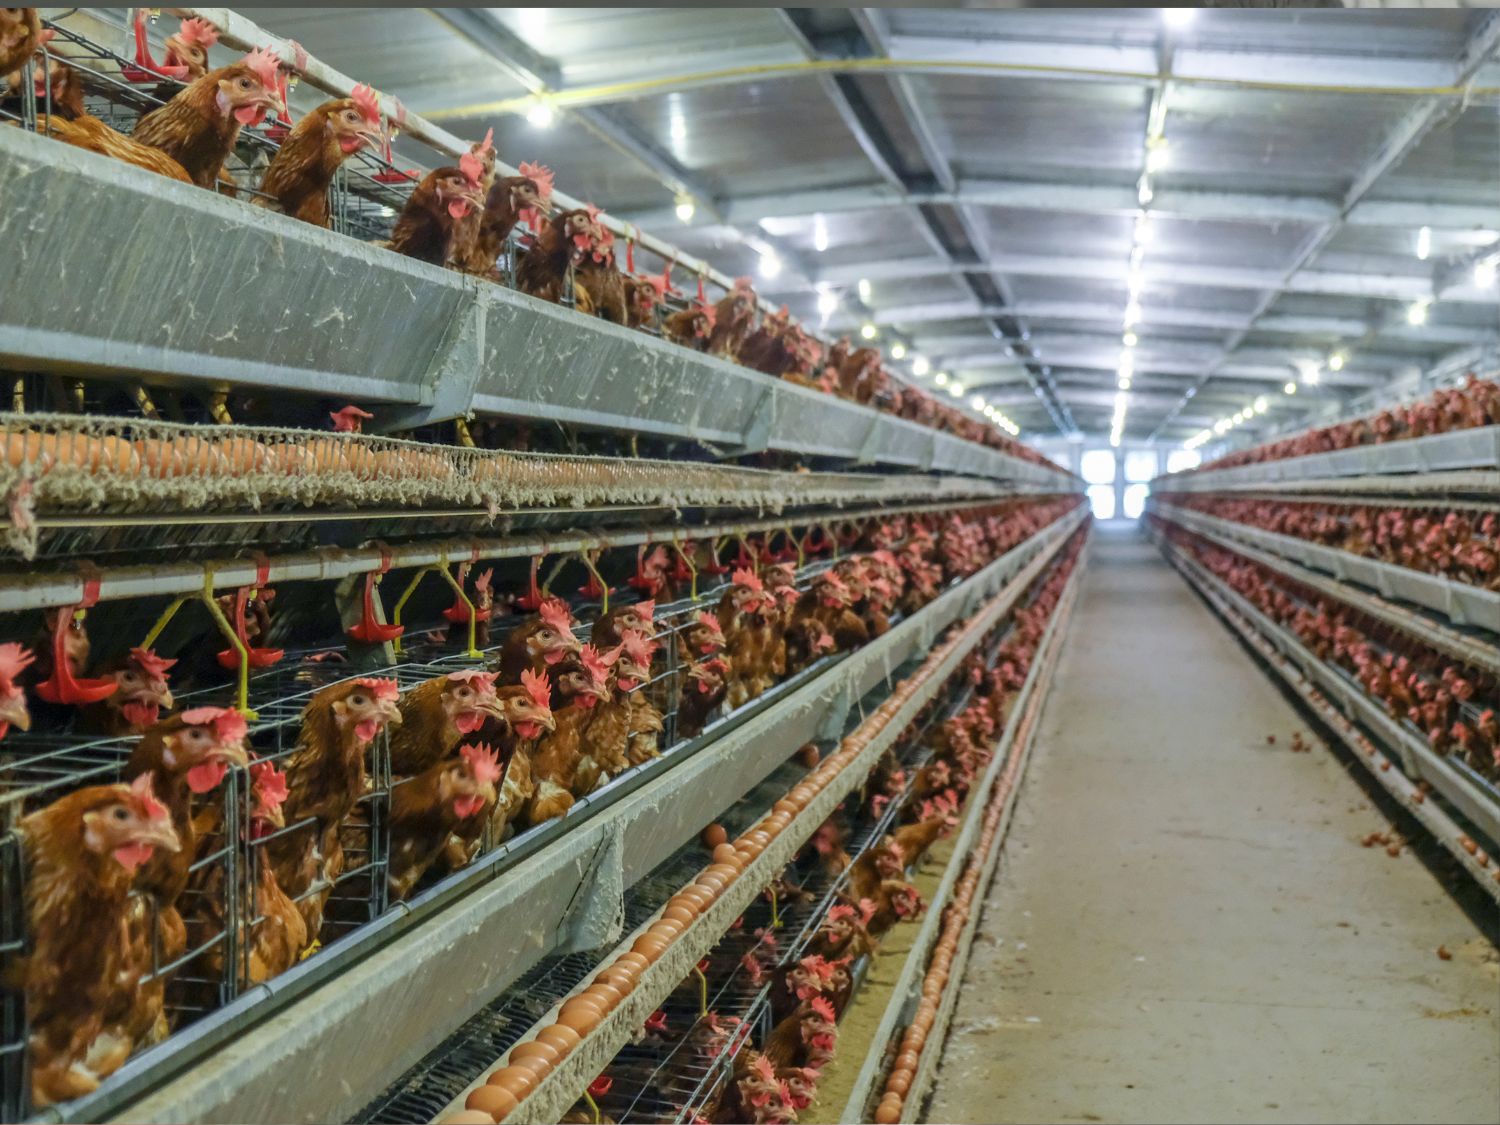 A photo showing the inside of a commercial egg laying facility